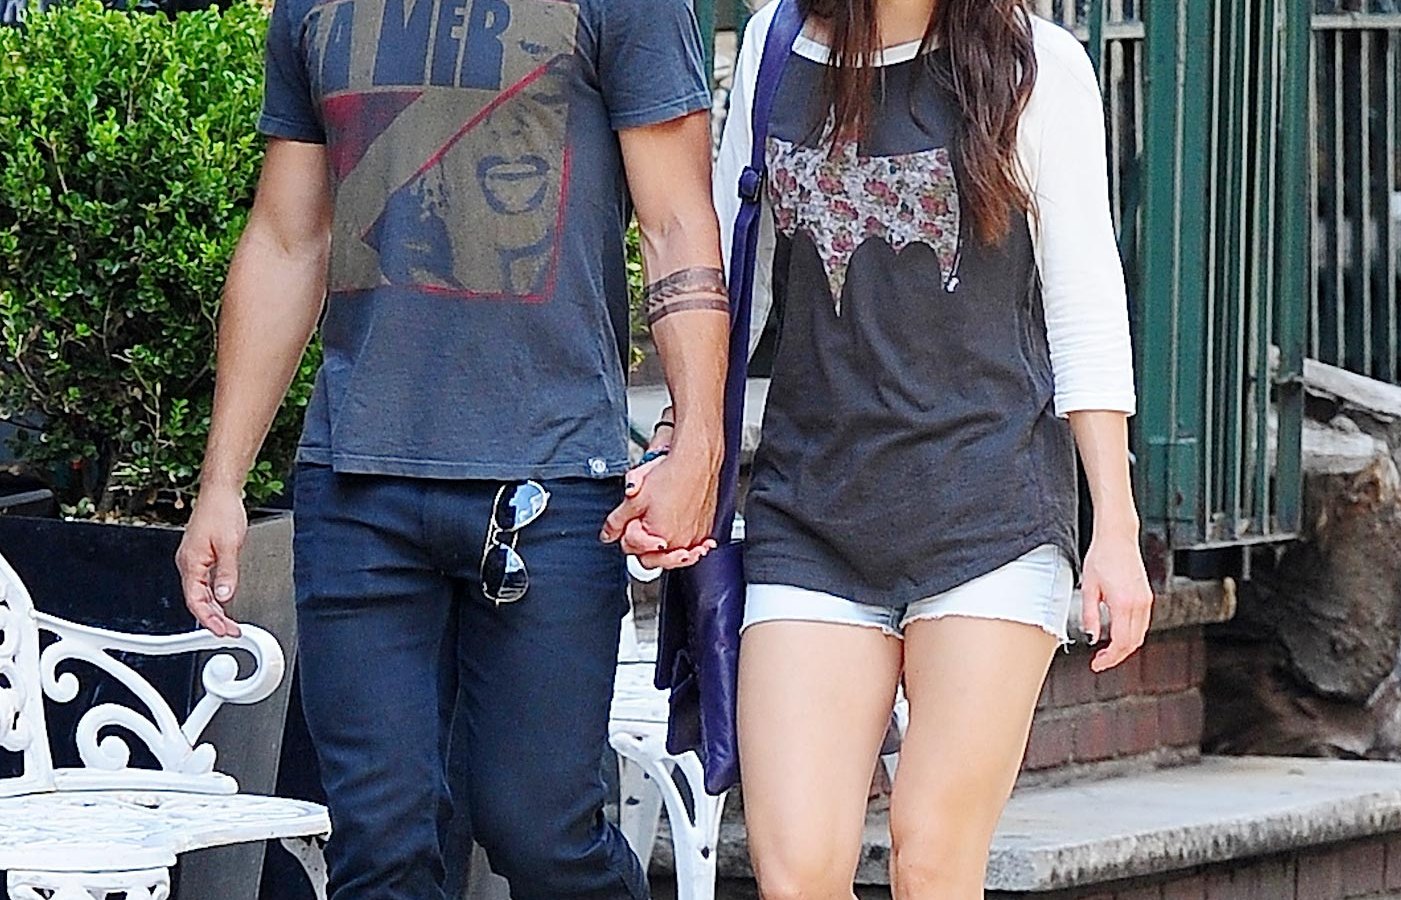 Taylor Lautner and Marie Avgeropoulos in New York on July 29, 2013